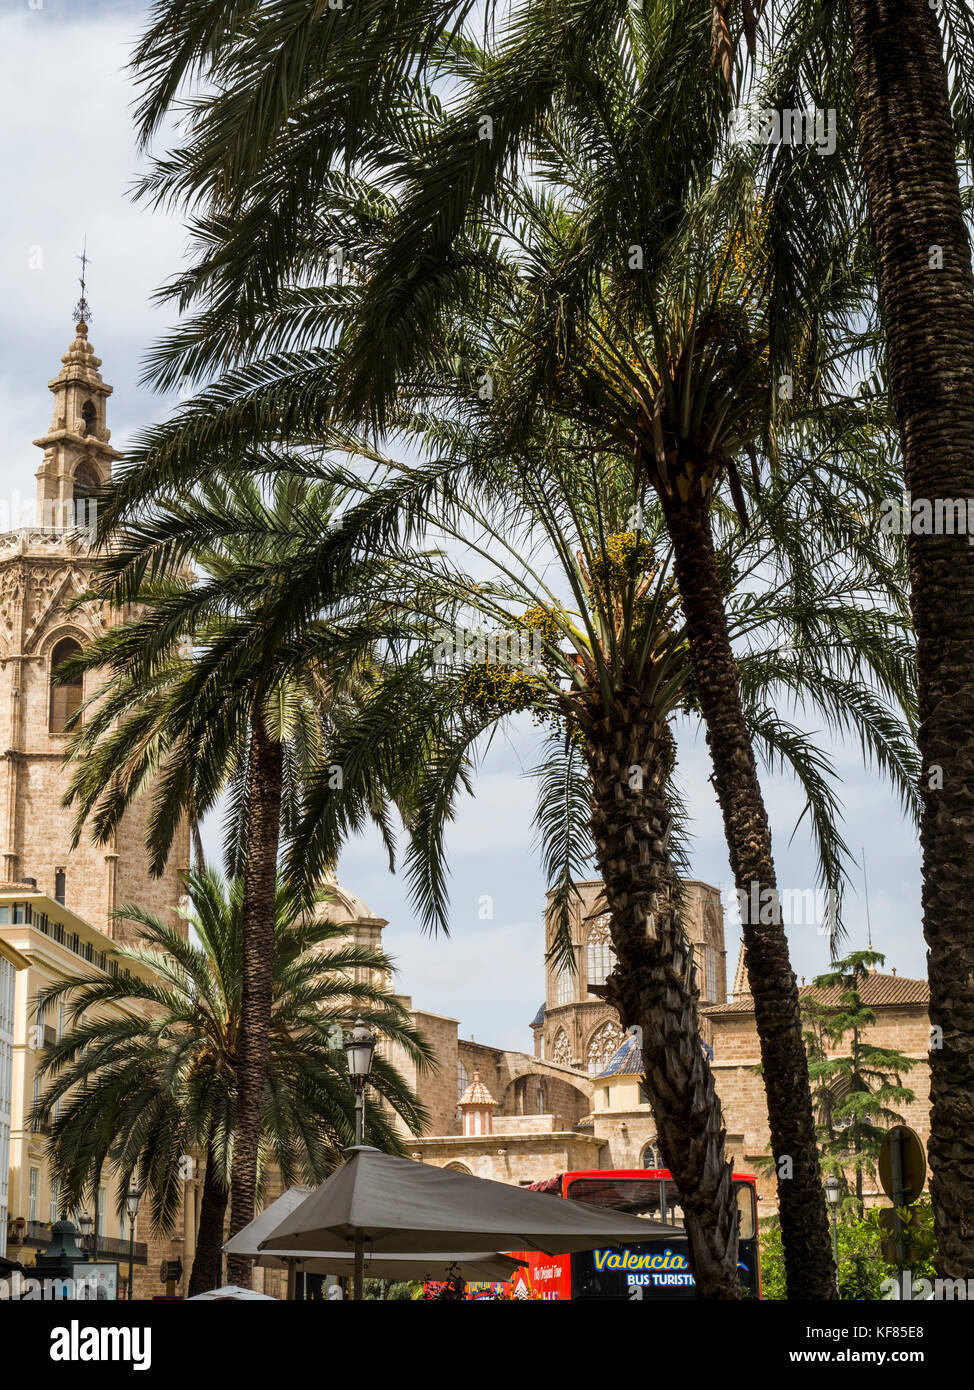 Skyline at Plaza de la Reina with Valencia Cathedral (centre) and its bell tower, el Miguelete (left), Ciutat Vella, Valencia, Spain Stock Photo